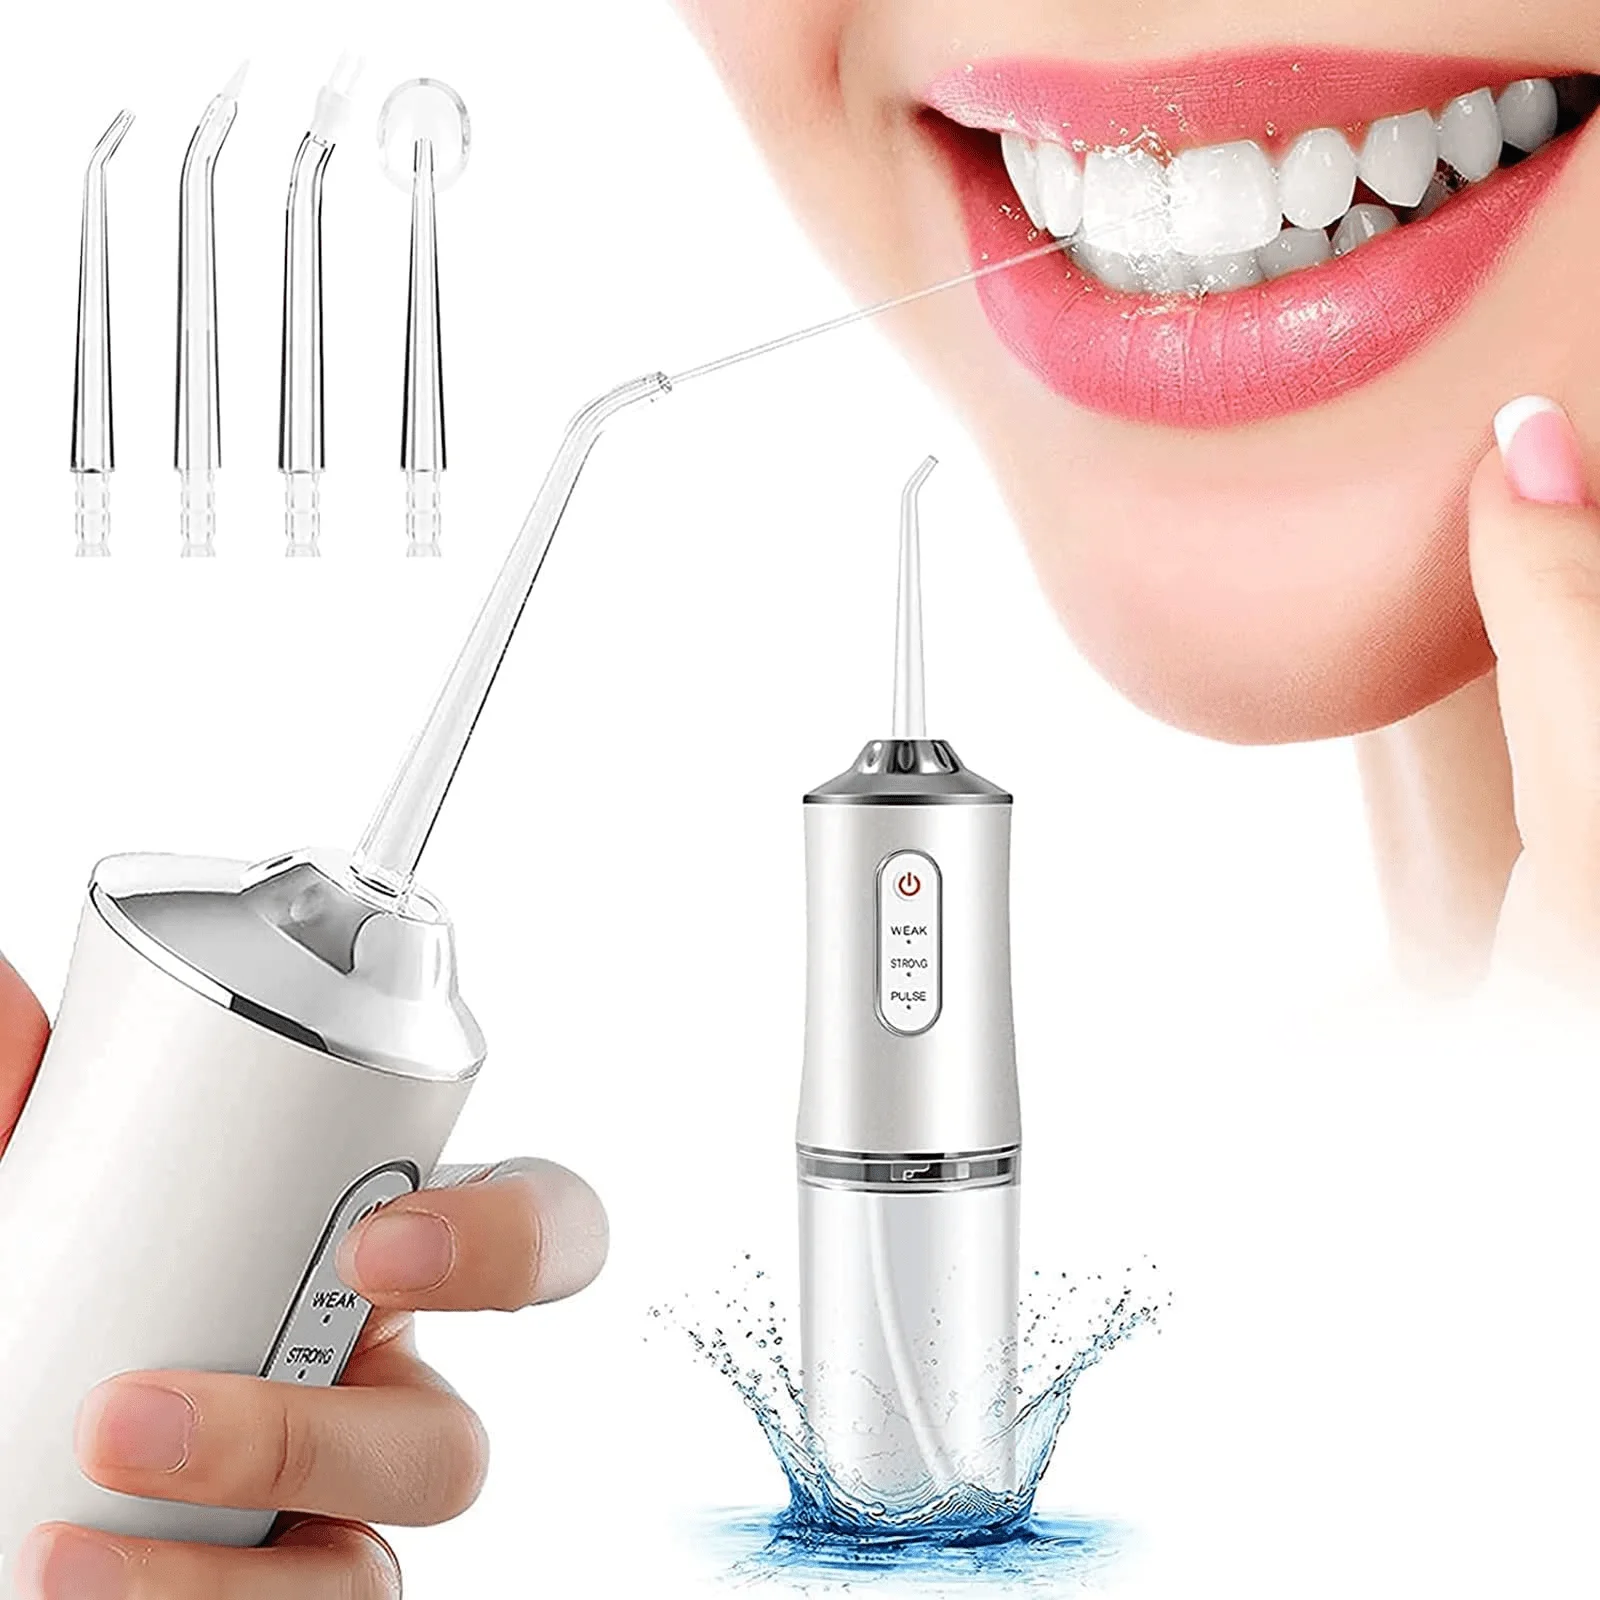 

Water Flosser for Teeth Cordless Water Flossers Dental Oral Irrigator with DIY Mode 4 Jet Tips, IPX7 Waterproof,Portable and Rec